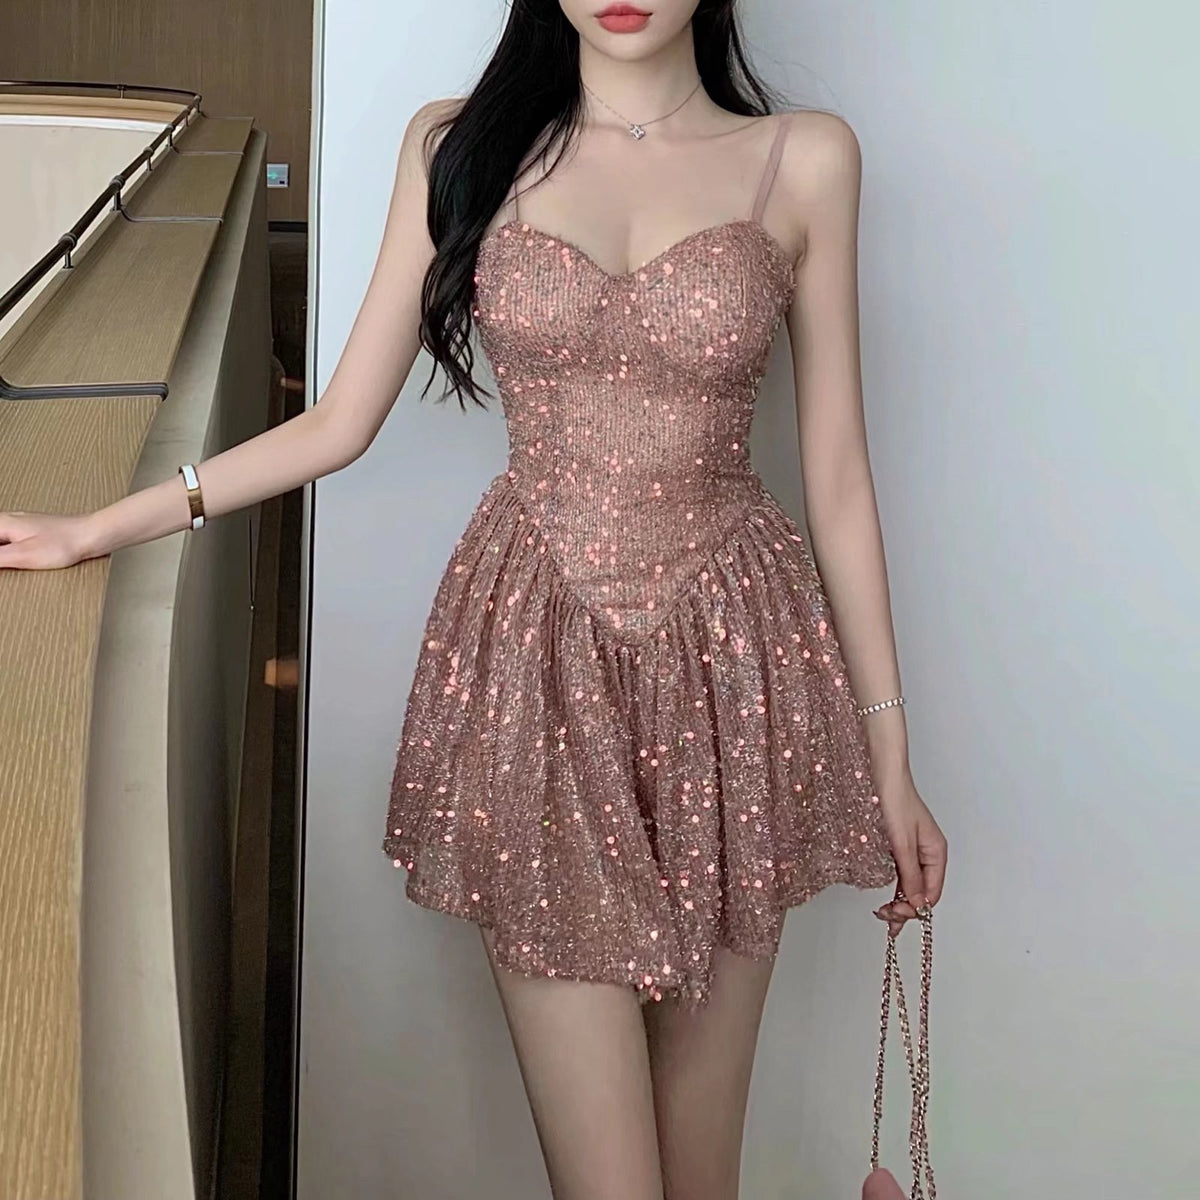 Sexy Crystal Bling Sequins Nightclub Dress Women Backless Slit Metal Fabric Rhinestones Party Club Mini Dresses for Lady